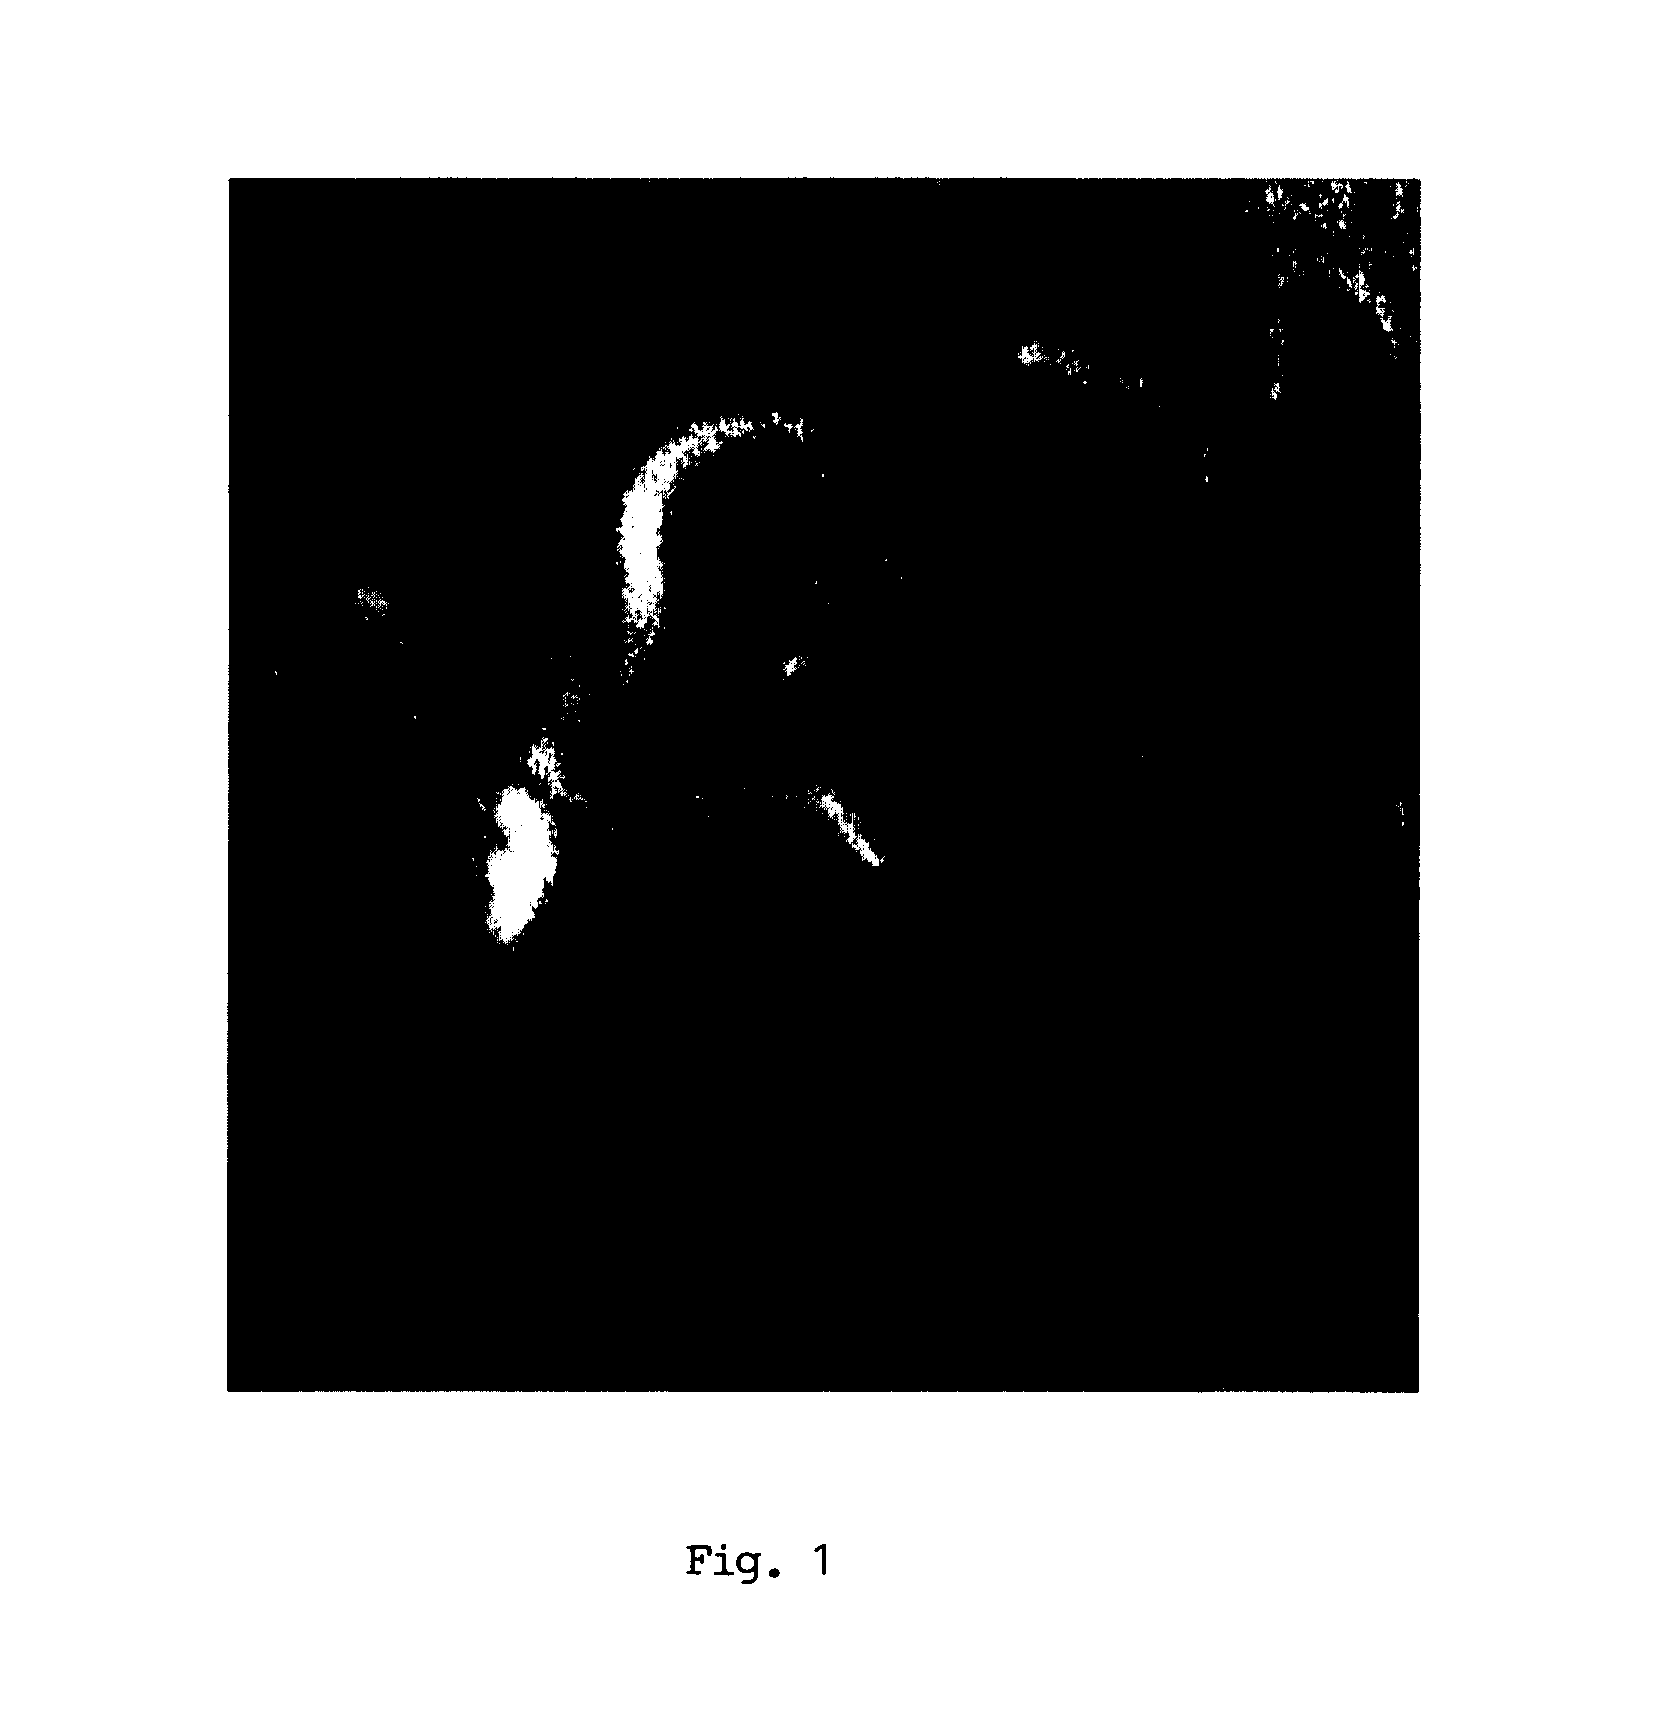 Method for enhancing blood vessels in angiography images